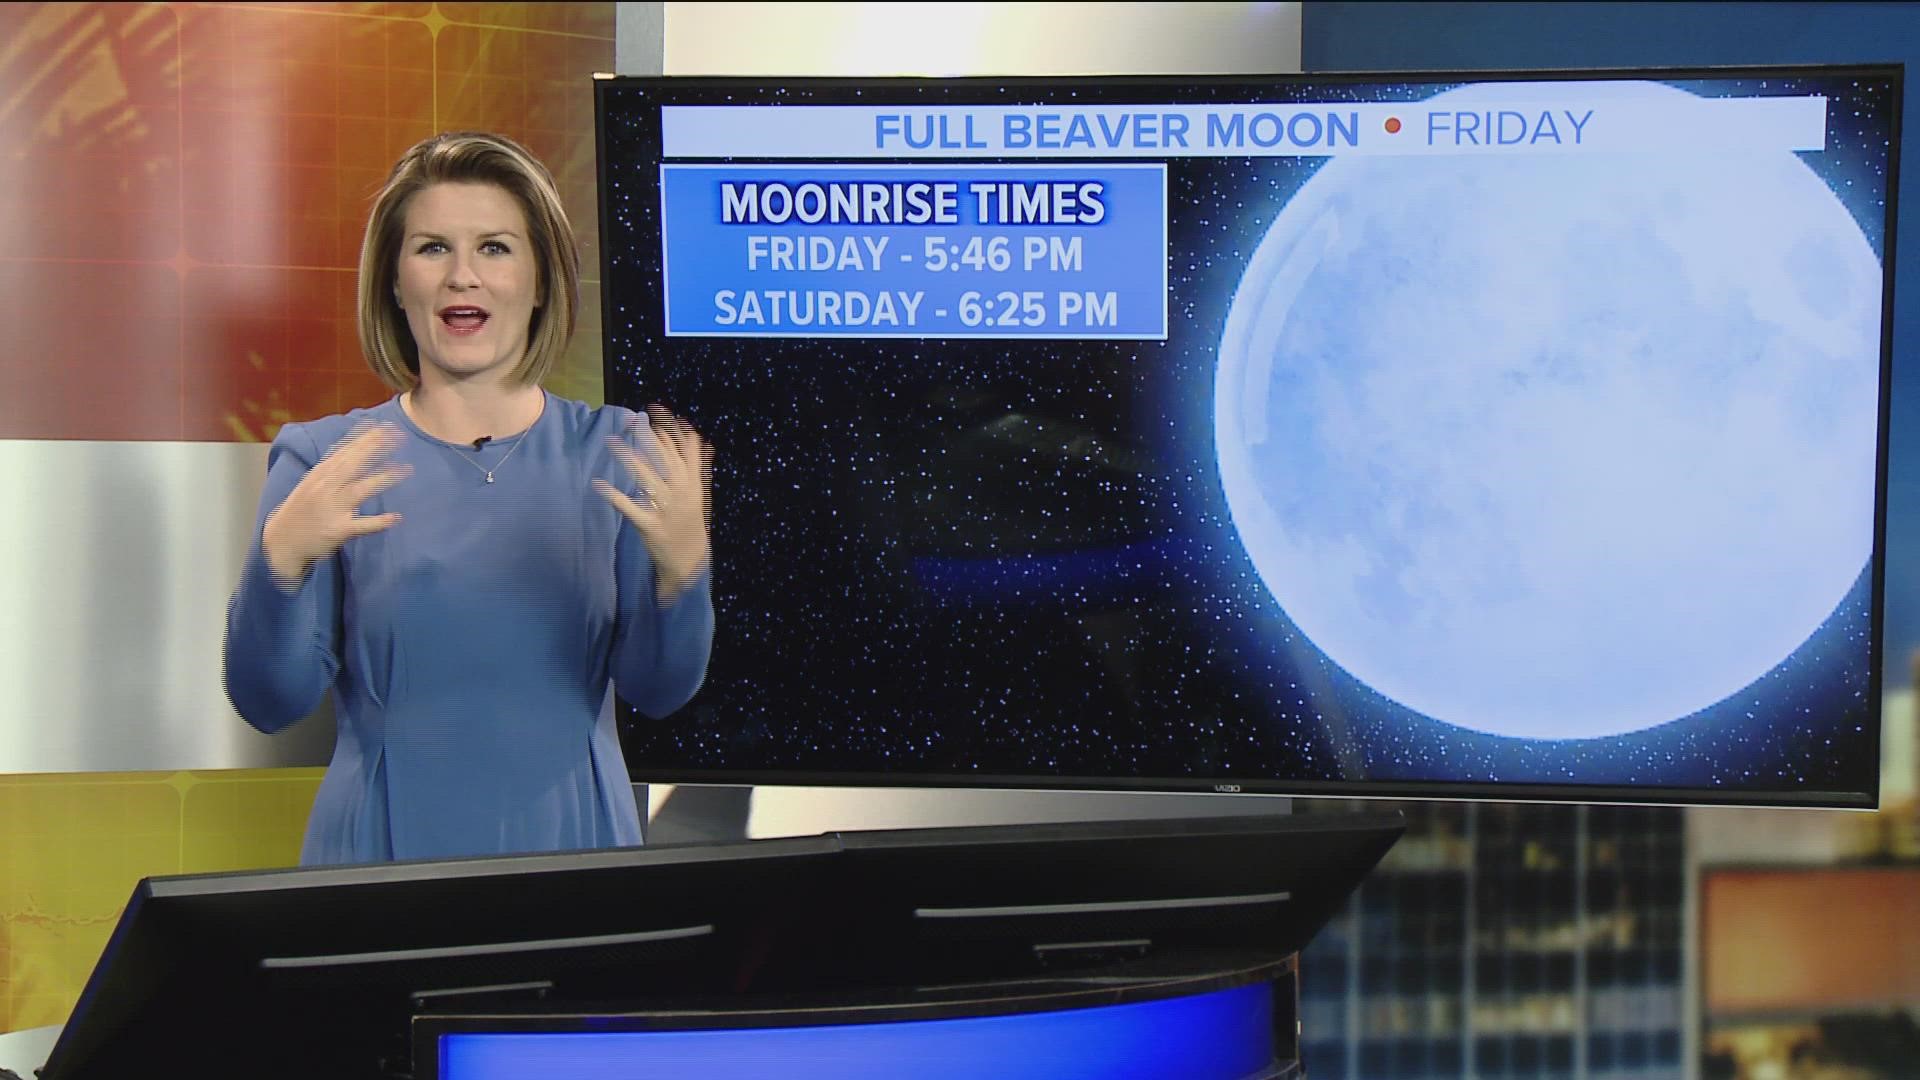 Why is it called a Beaver Moon? The clue is in the name…